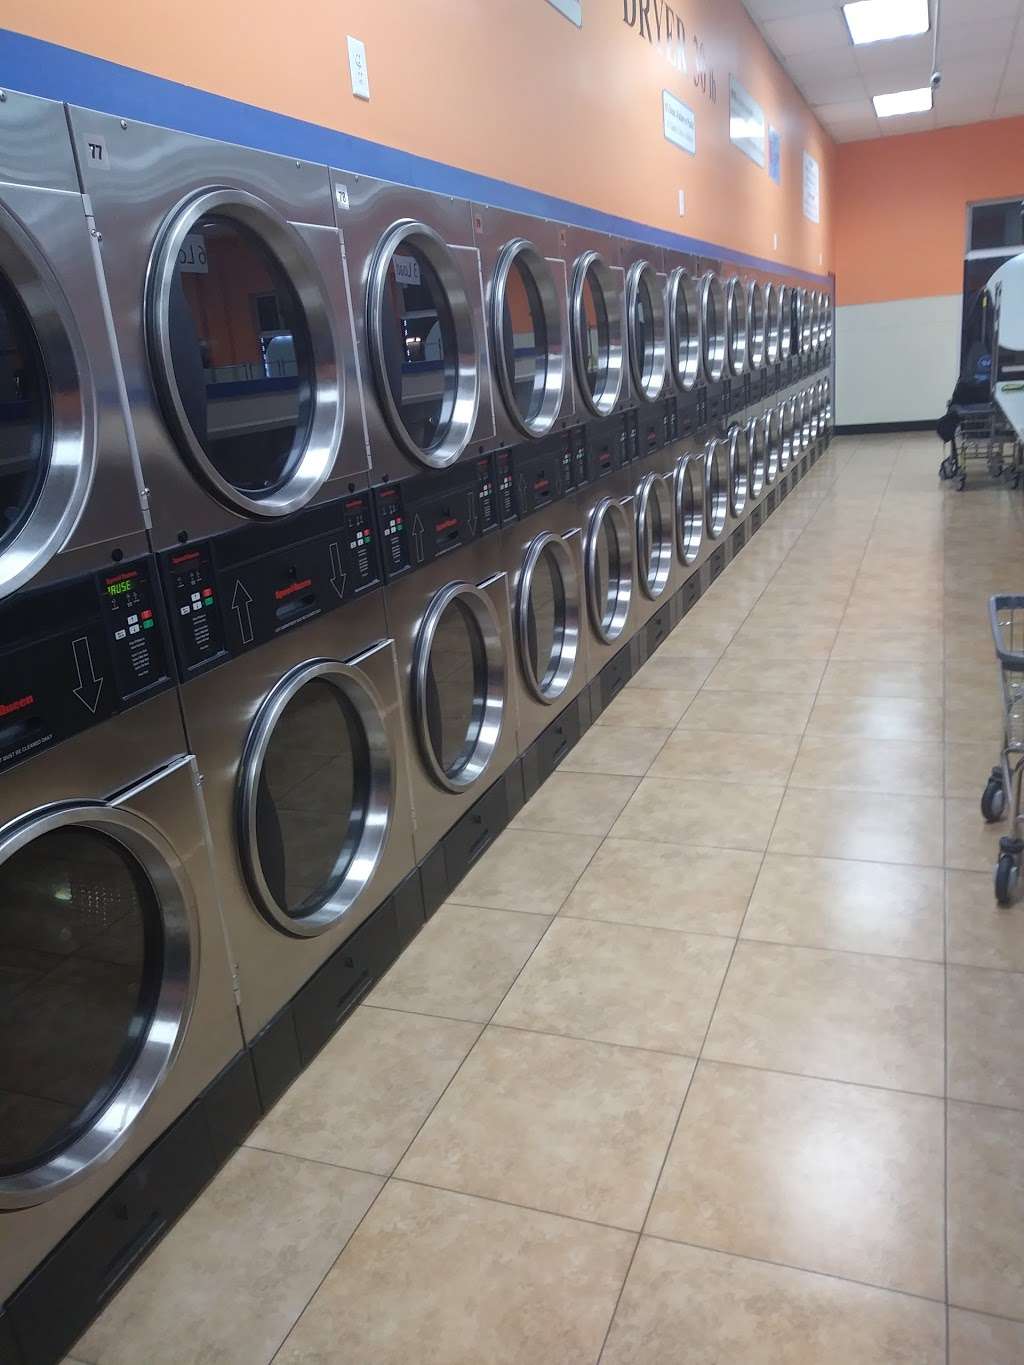 MLK COIN LAUNDRY | 1755 W Martin Luther King Jr Blvd, Los Angeles, CA 90062 | Phone: (323) 596-3772